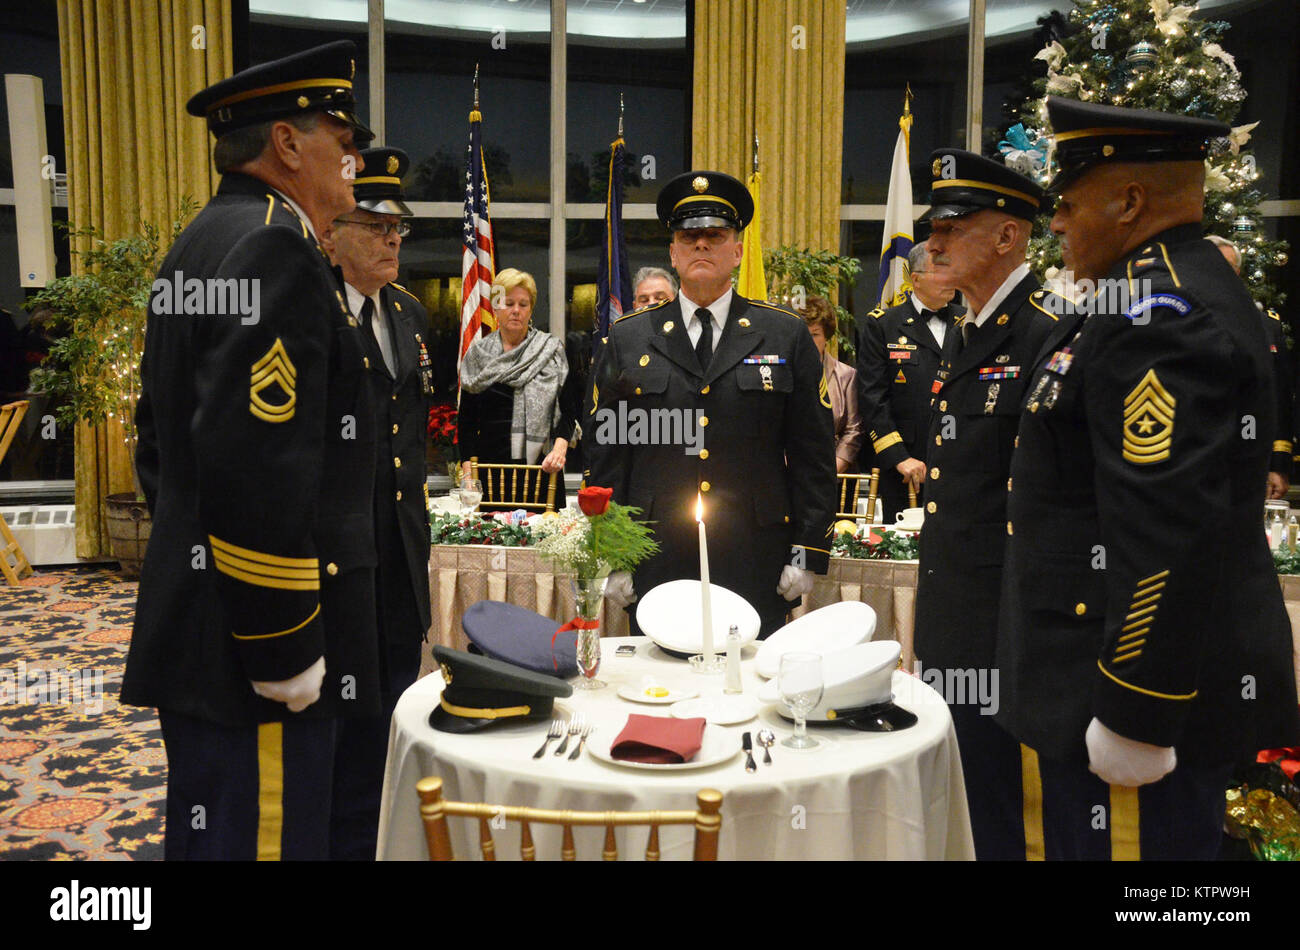 West Point, NY – On December 4th 2015, the New York Guard and the New York Naval Militia held their annual holiday Gala at the West Point Club located at the West Point Military Academy. The Guest speaker for the evening was Major General Patrick A. Murphy Adjutant General of New York State Military Forces. – Photos by Captain Mark Getman, New York Guard Stock Photo